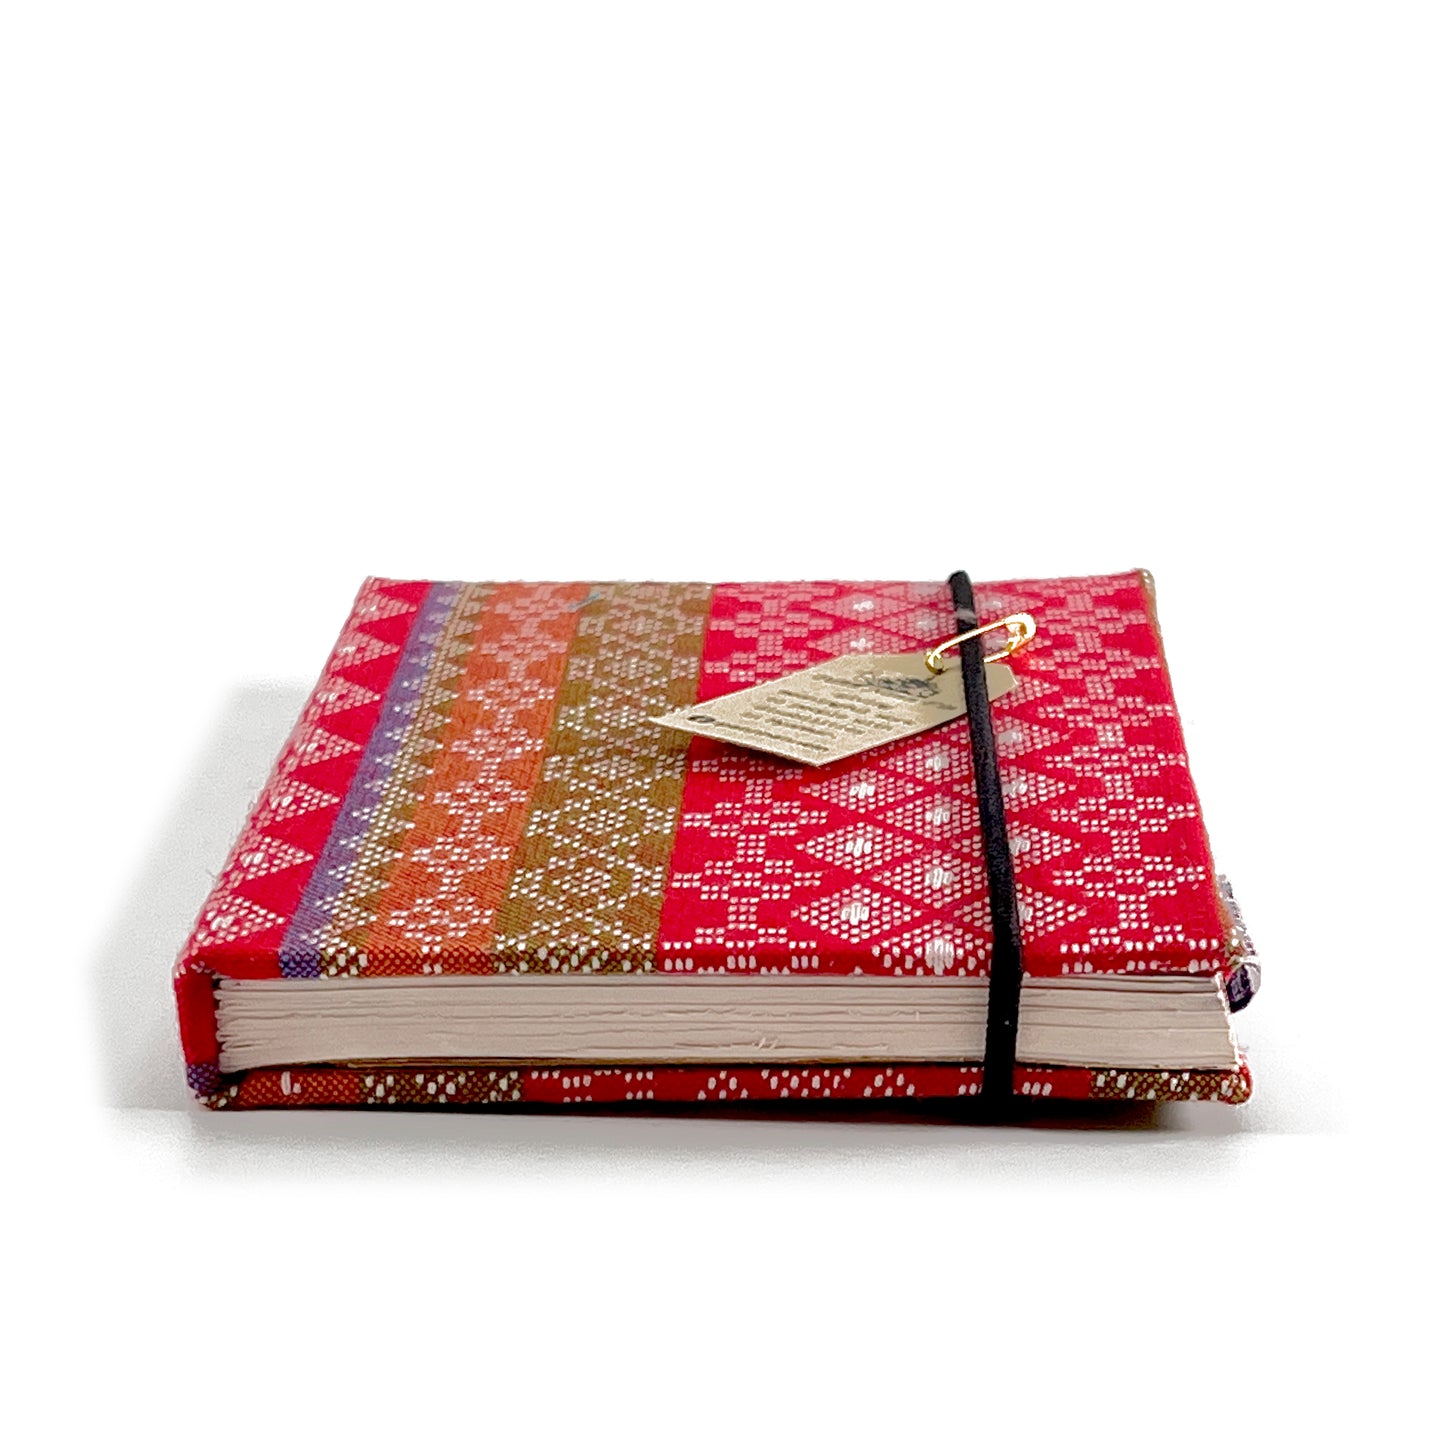 Notebook - textile cover